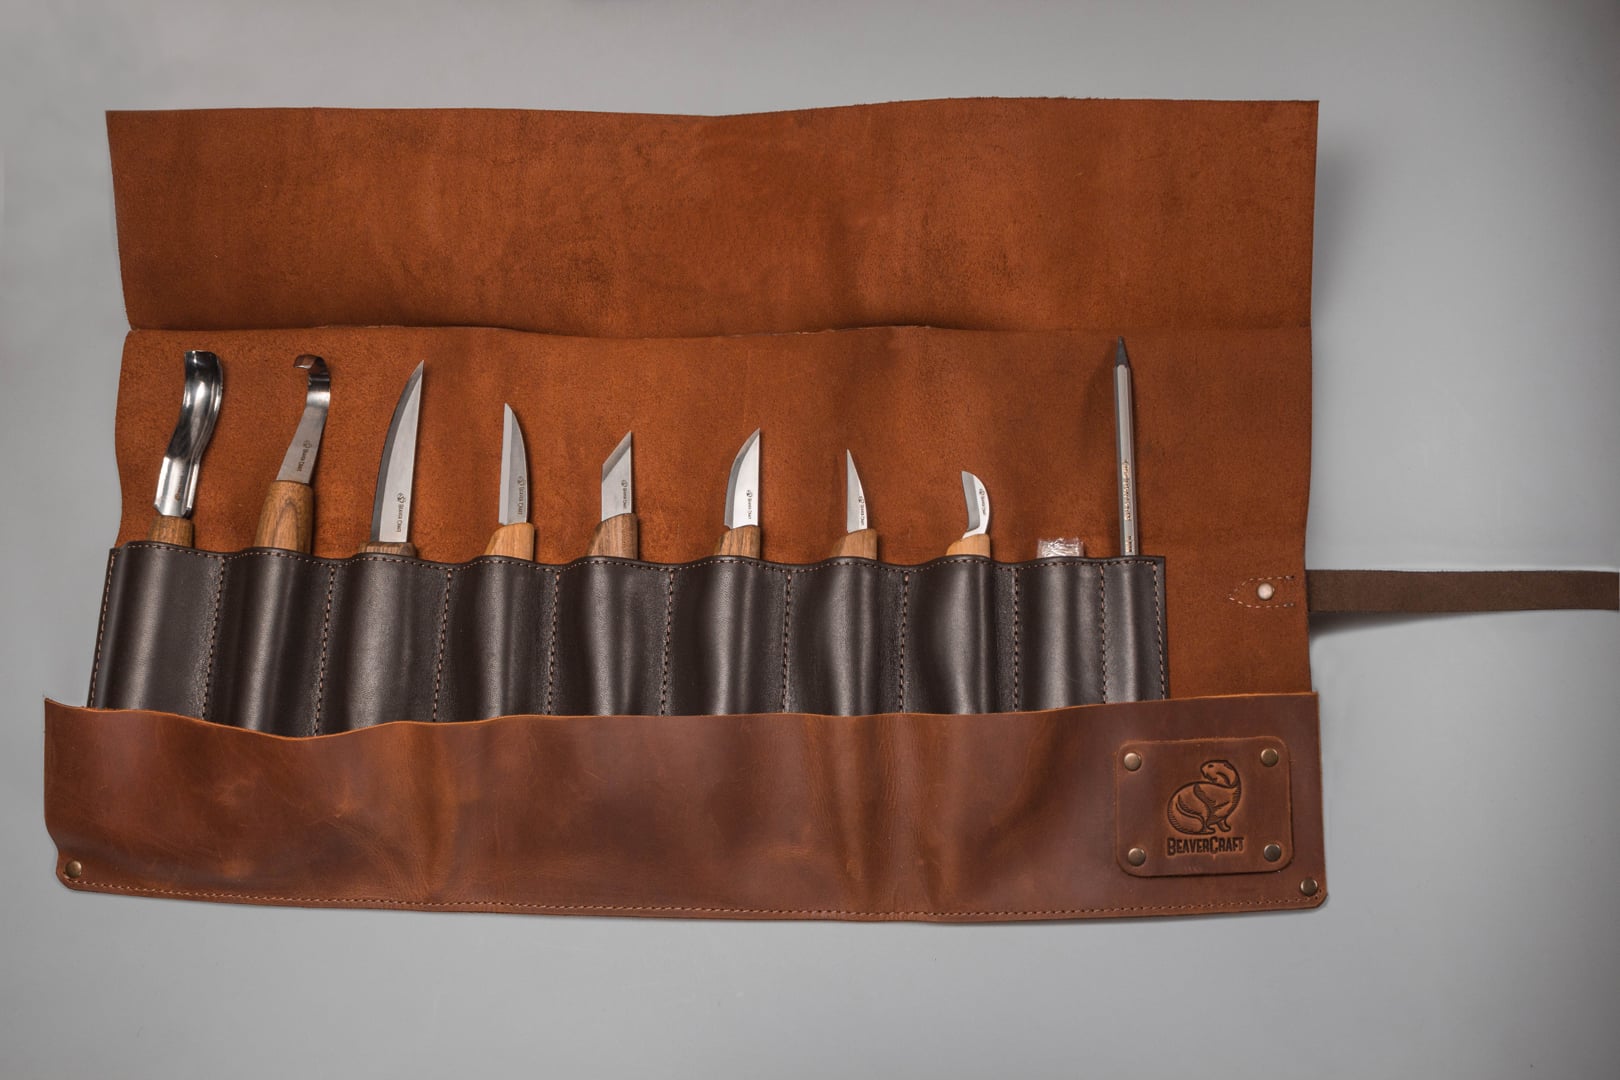 Beaver Craft Premium Wood Carving Set with Leather Tool Roll - S18X